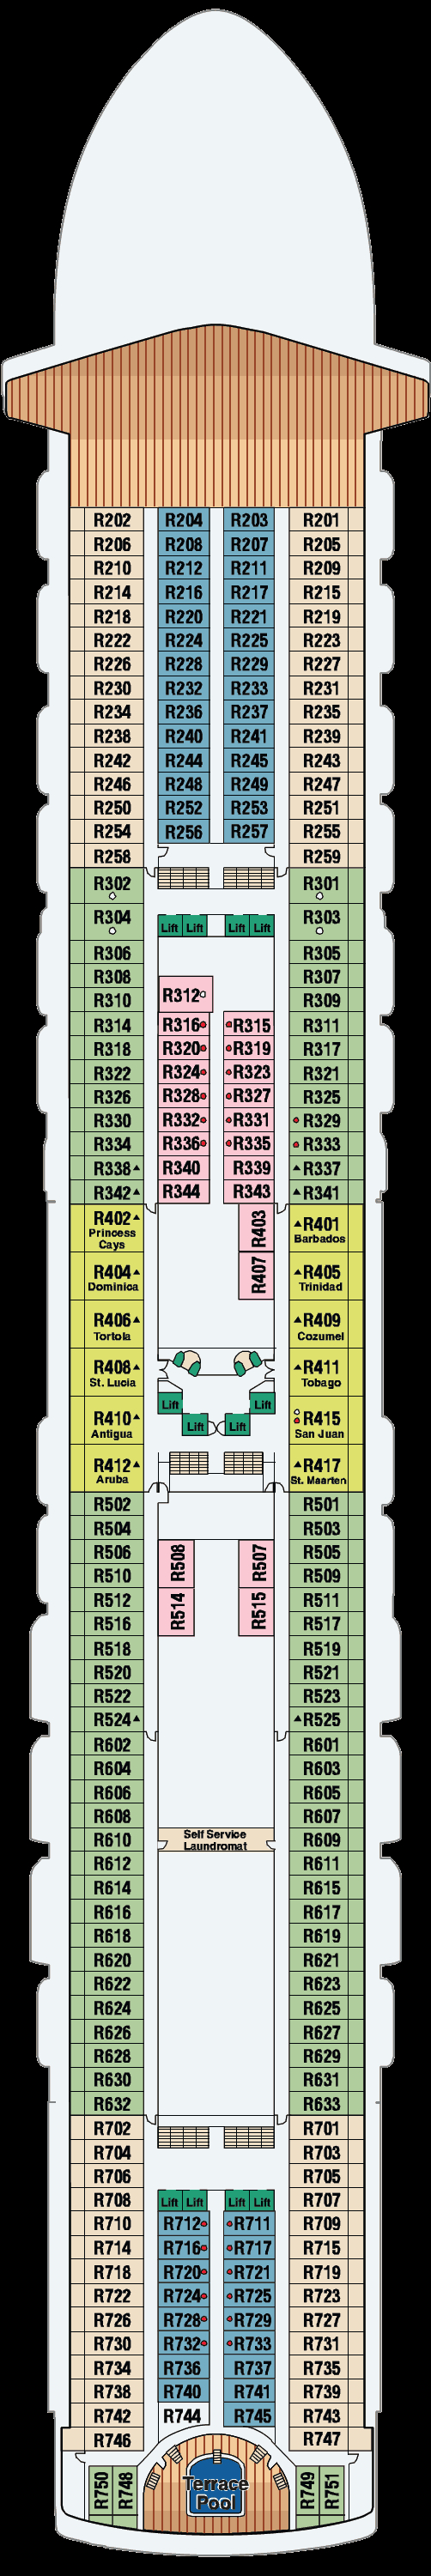 Ru Princess Deck Plans Cruiseline intended for dimensions 502 X 3001